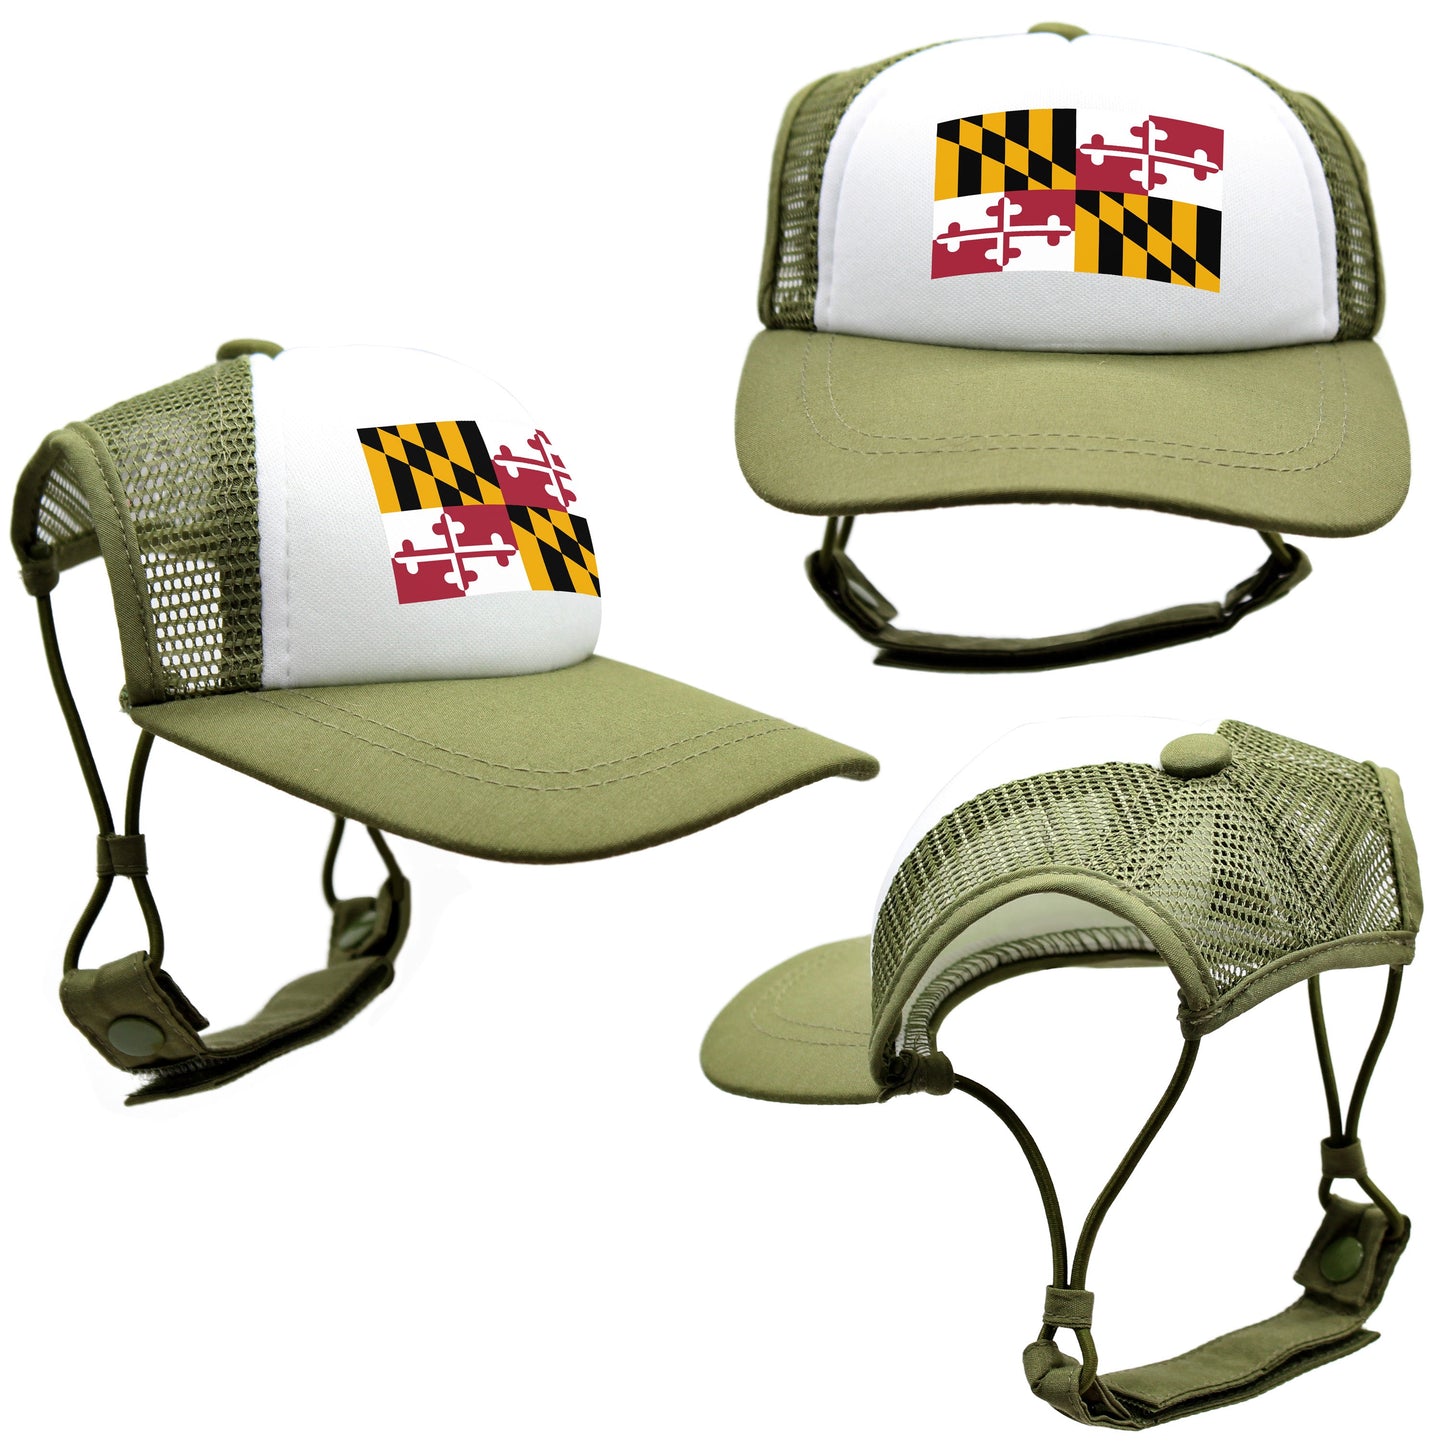 PupLid Cities & States | Size Small Dog Hat | Fall Collection